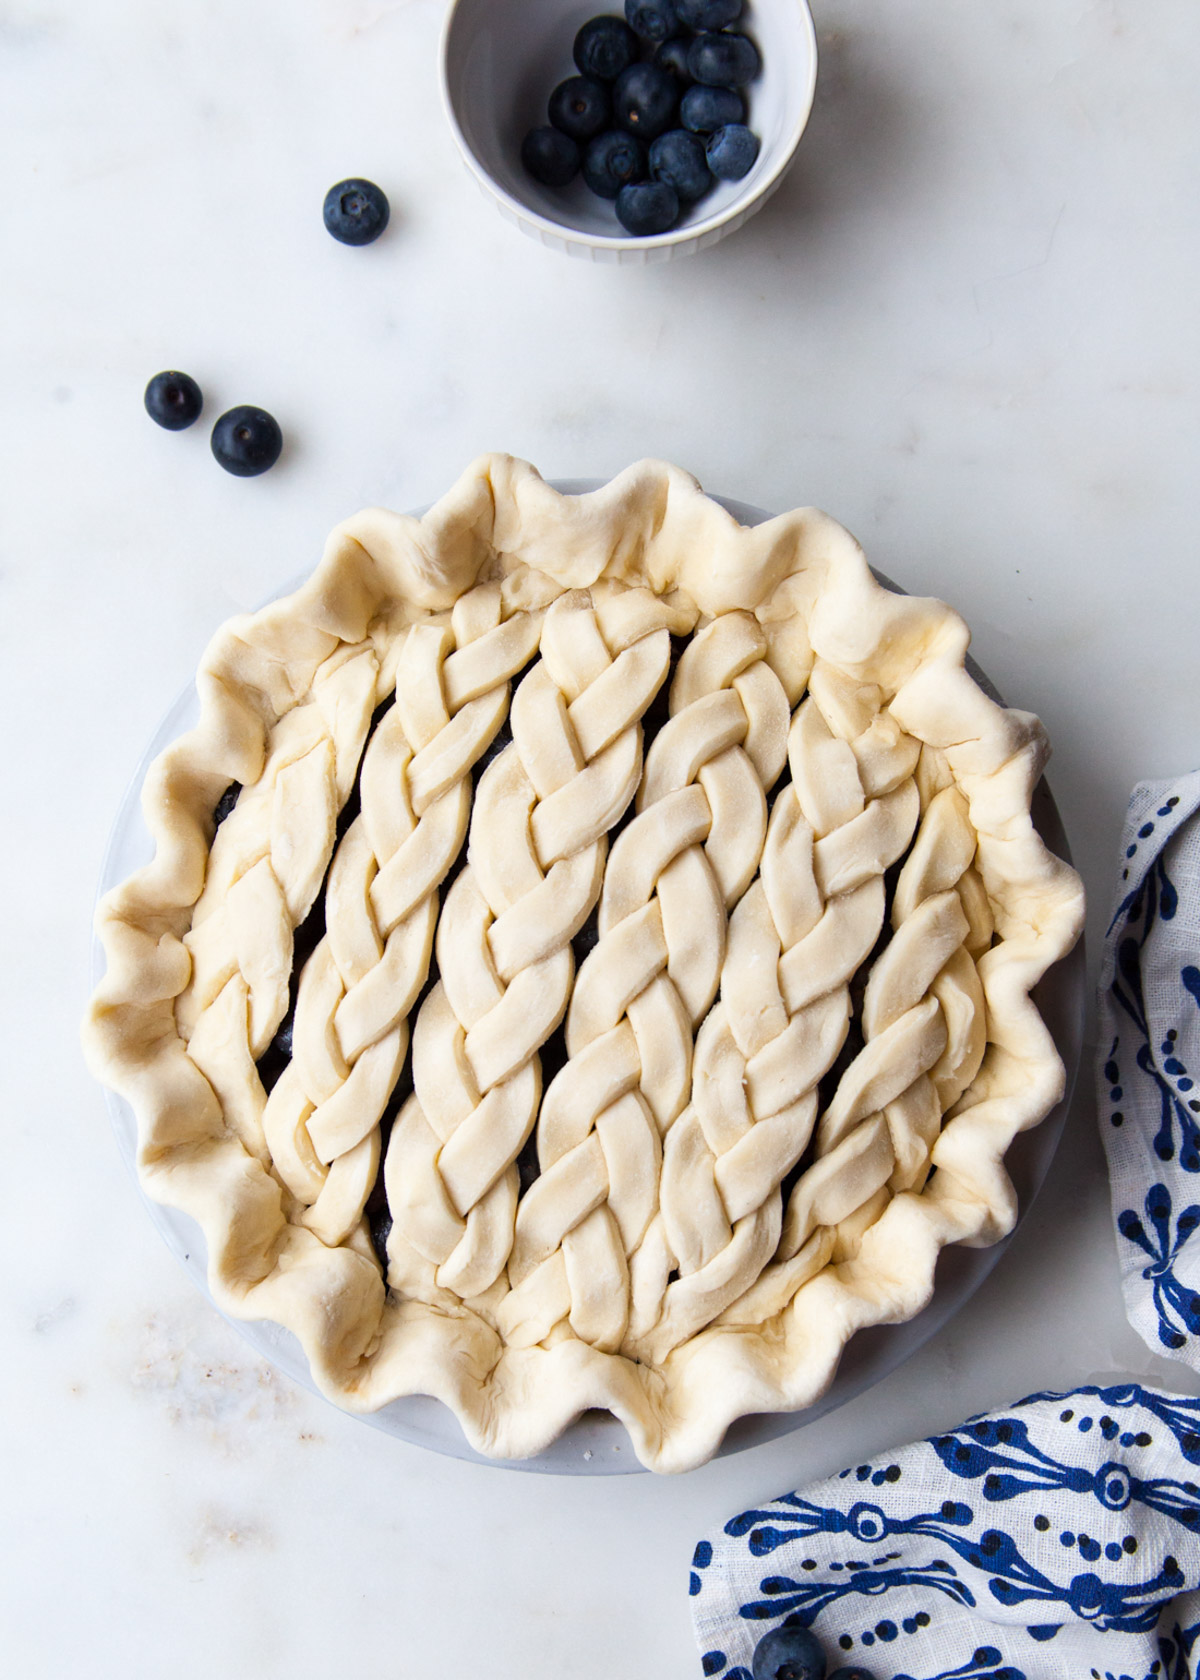 A blueberry pie with braided pie dough on top